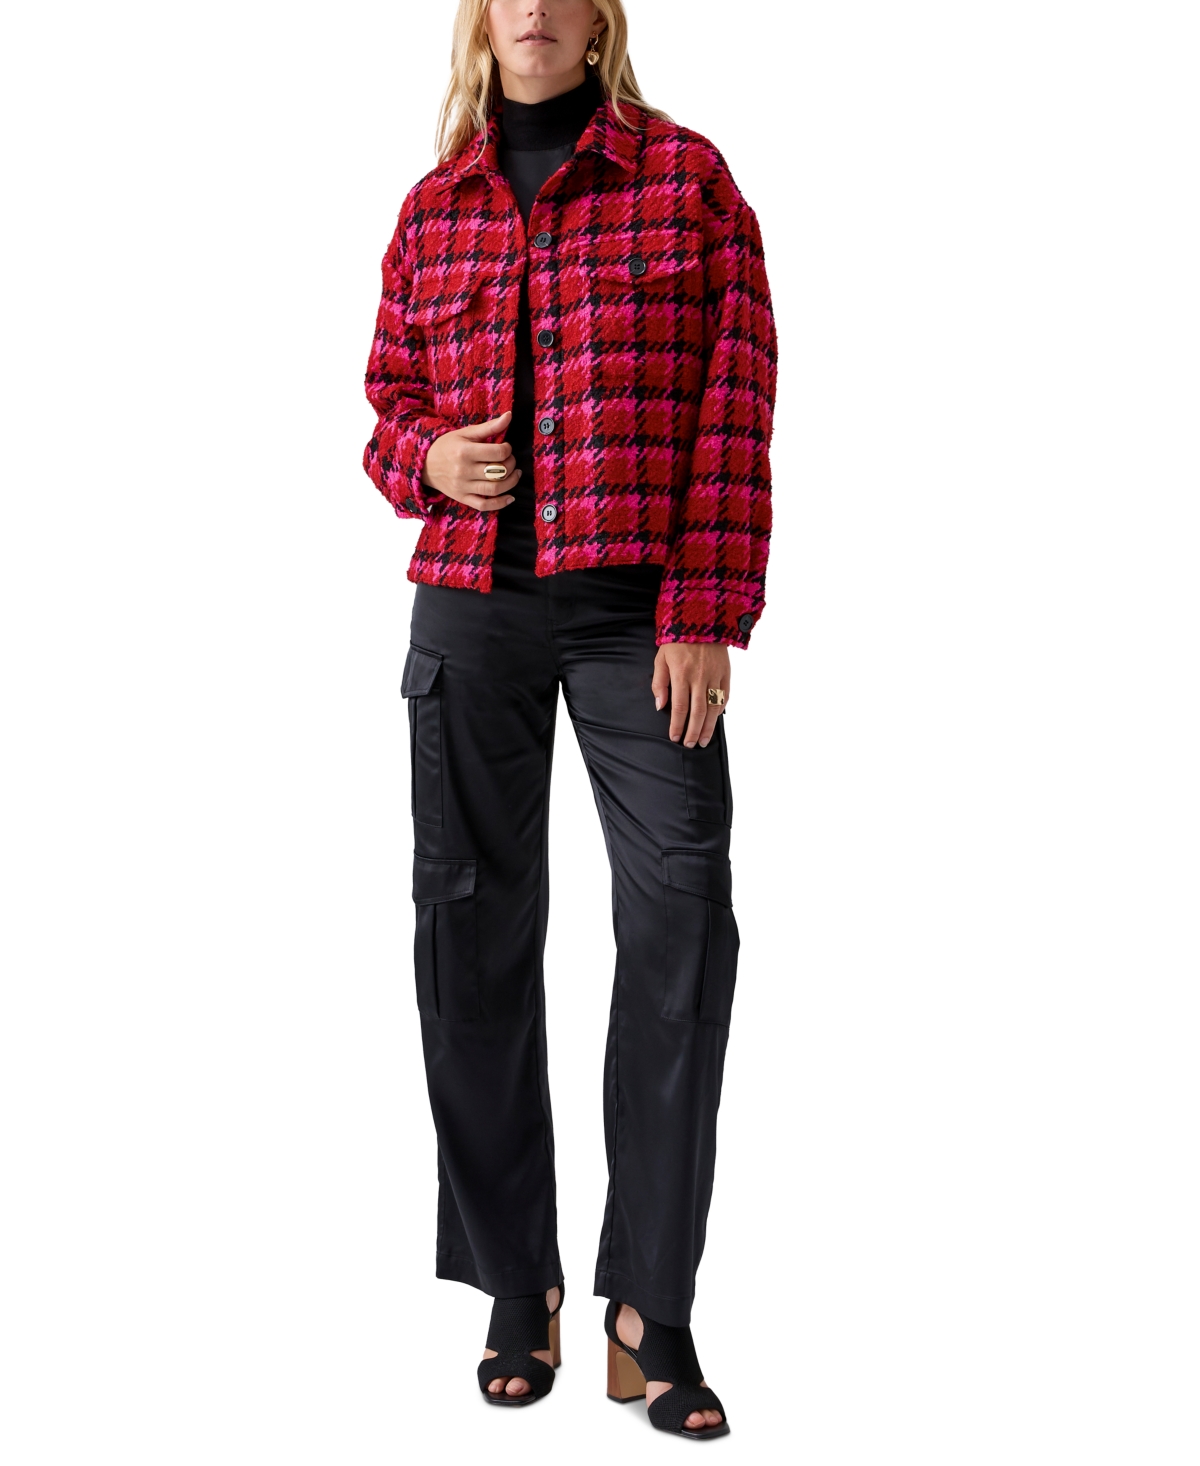 Women's Plaid Button-Front Long-Sleeve Jacket - Lipstick Red Plaid